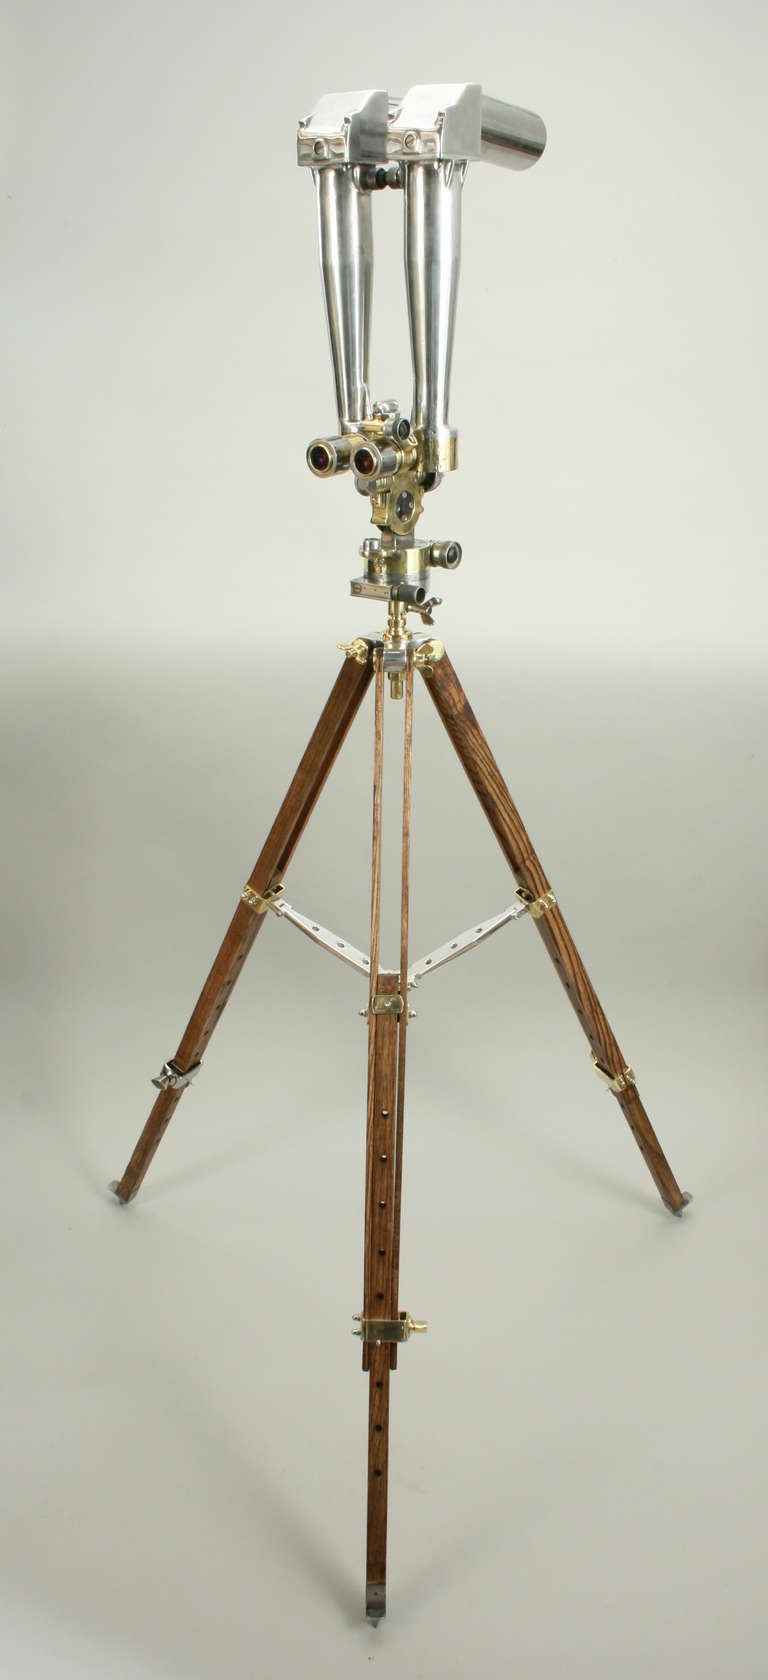 A great pair of binoculars known as ‘Binocular Periscope’, 'Trench Binoculars', ‘Battery commander’s telescope’ or ‘Donkey Ear Binoculars’. The binocular periscope is mounted on an old wooden tripod and the whole apparatus is stripped of paint and